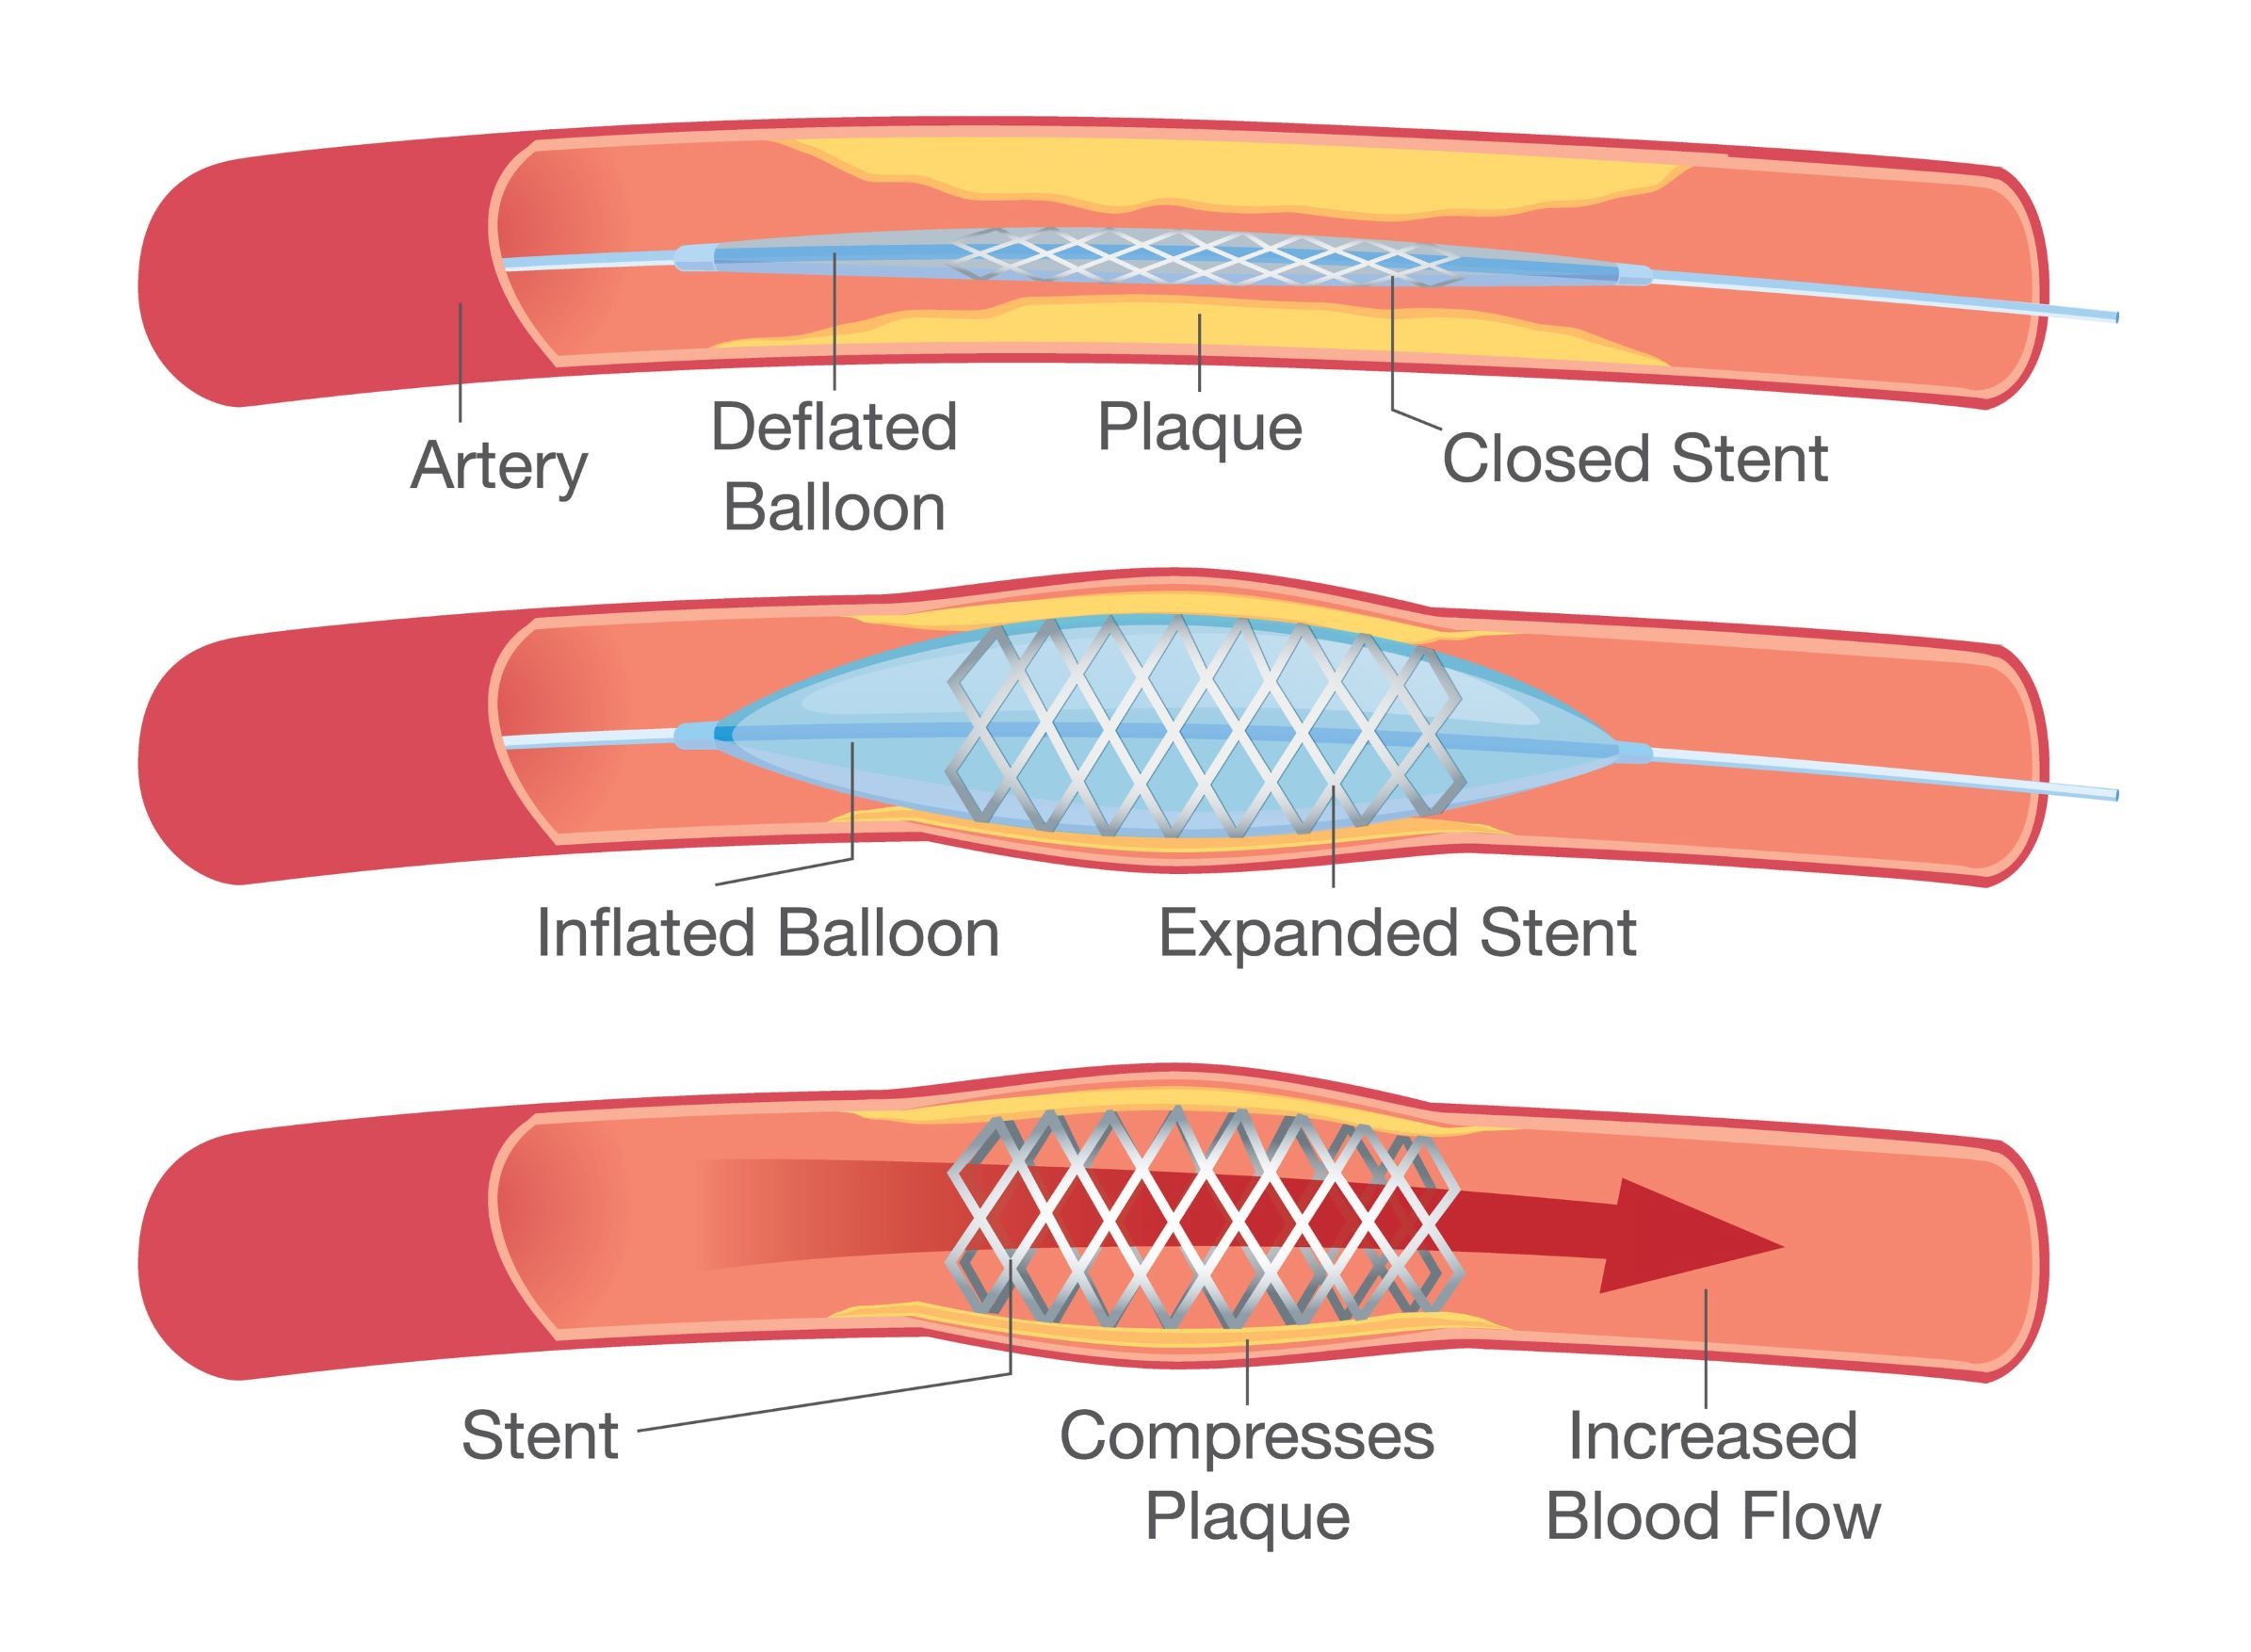 PCI Stent is inserted to increase blood flow